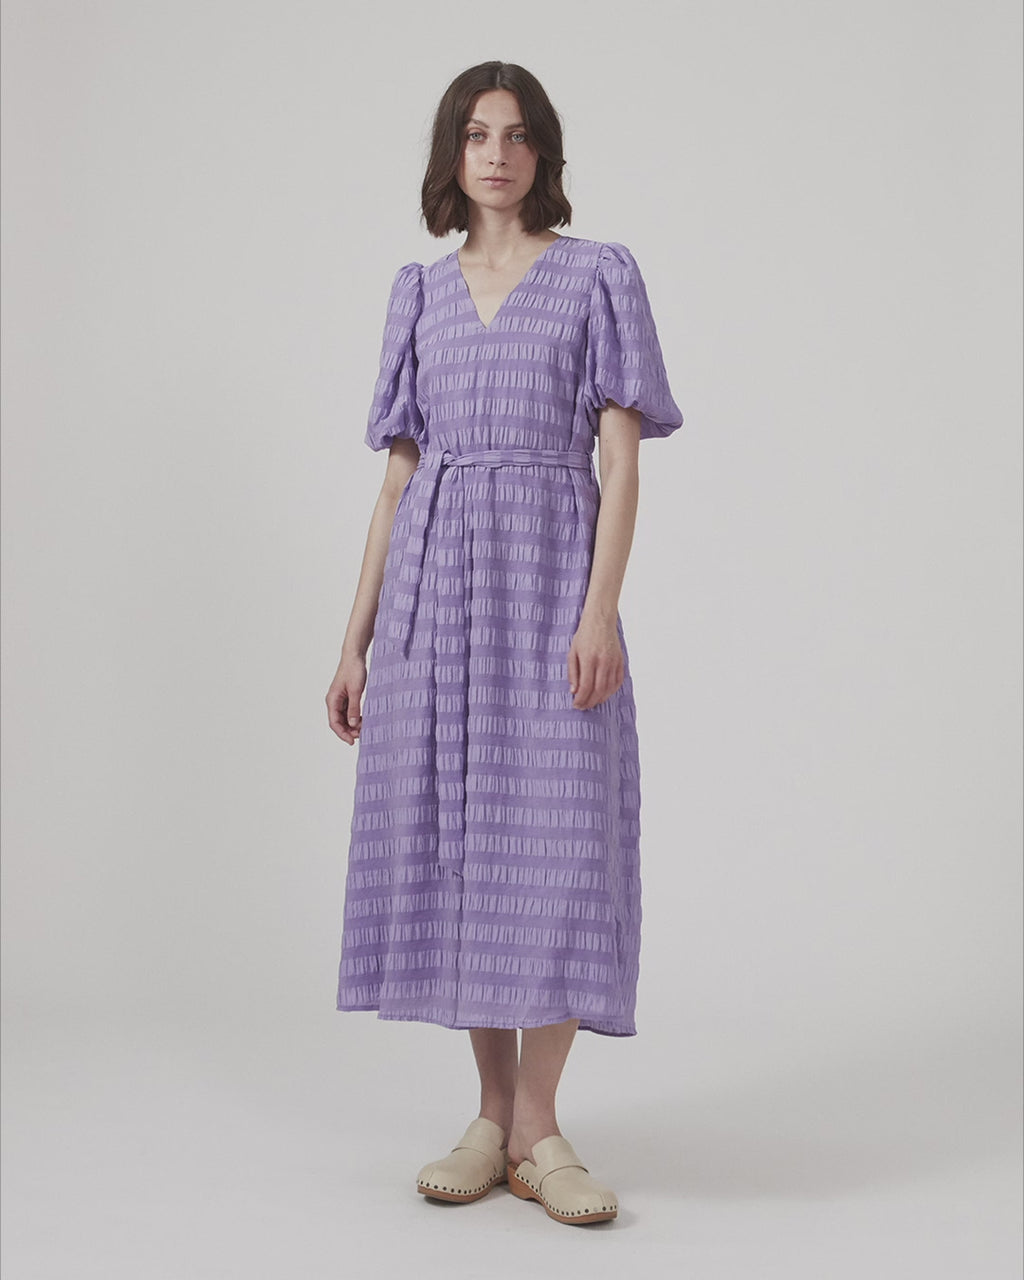 Long dress in structured fabric. CalieMD dress has short puff sleeves, v-shaped neckline, and a tie-belt at the waist.  The model is 177 cm and wears a size S/36.